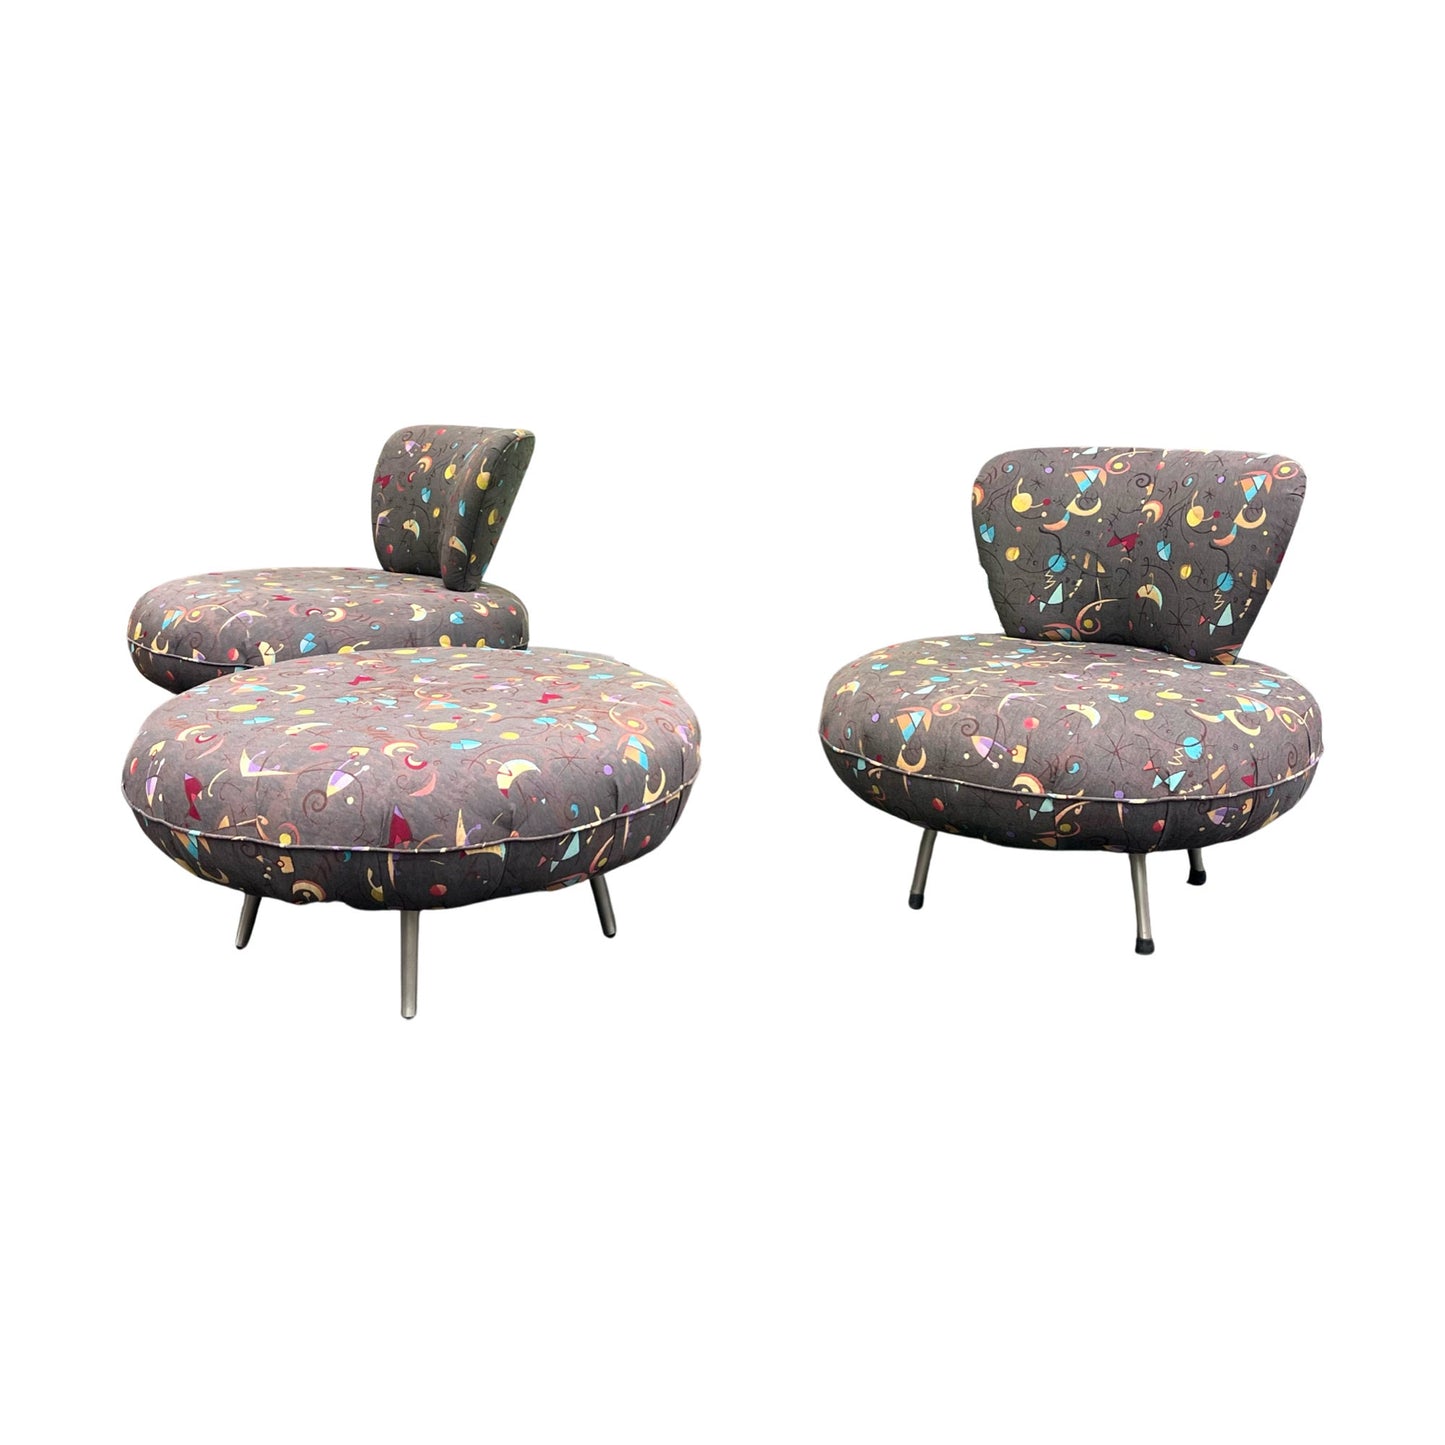 Contemporary Post-Modern 'Jupiter' swivel chairs and ottoman